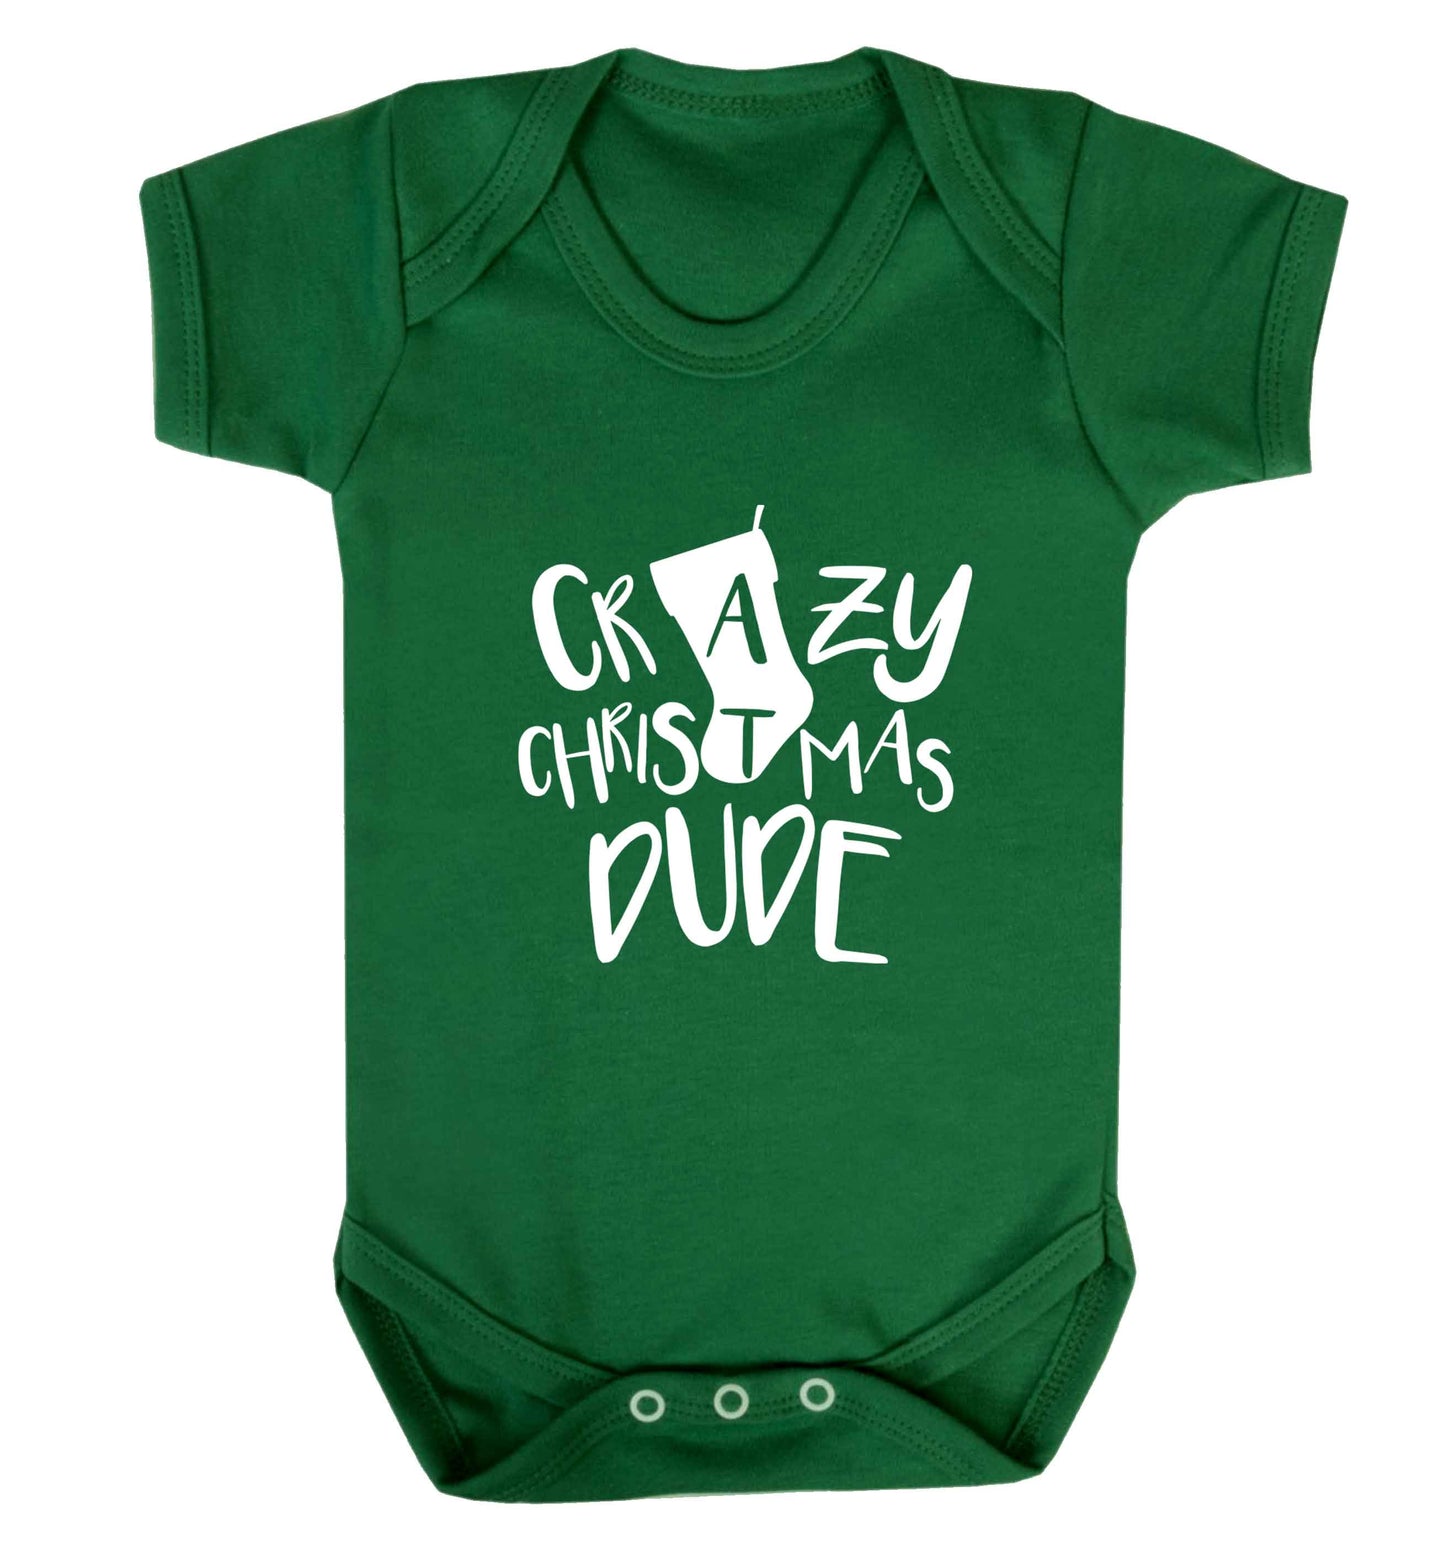 Crazy Christmas Dude baby vest green 18-24 months